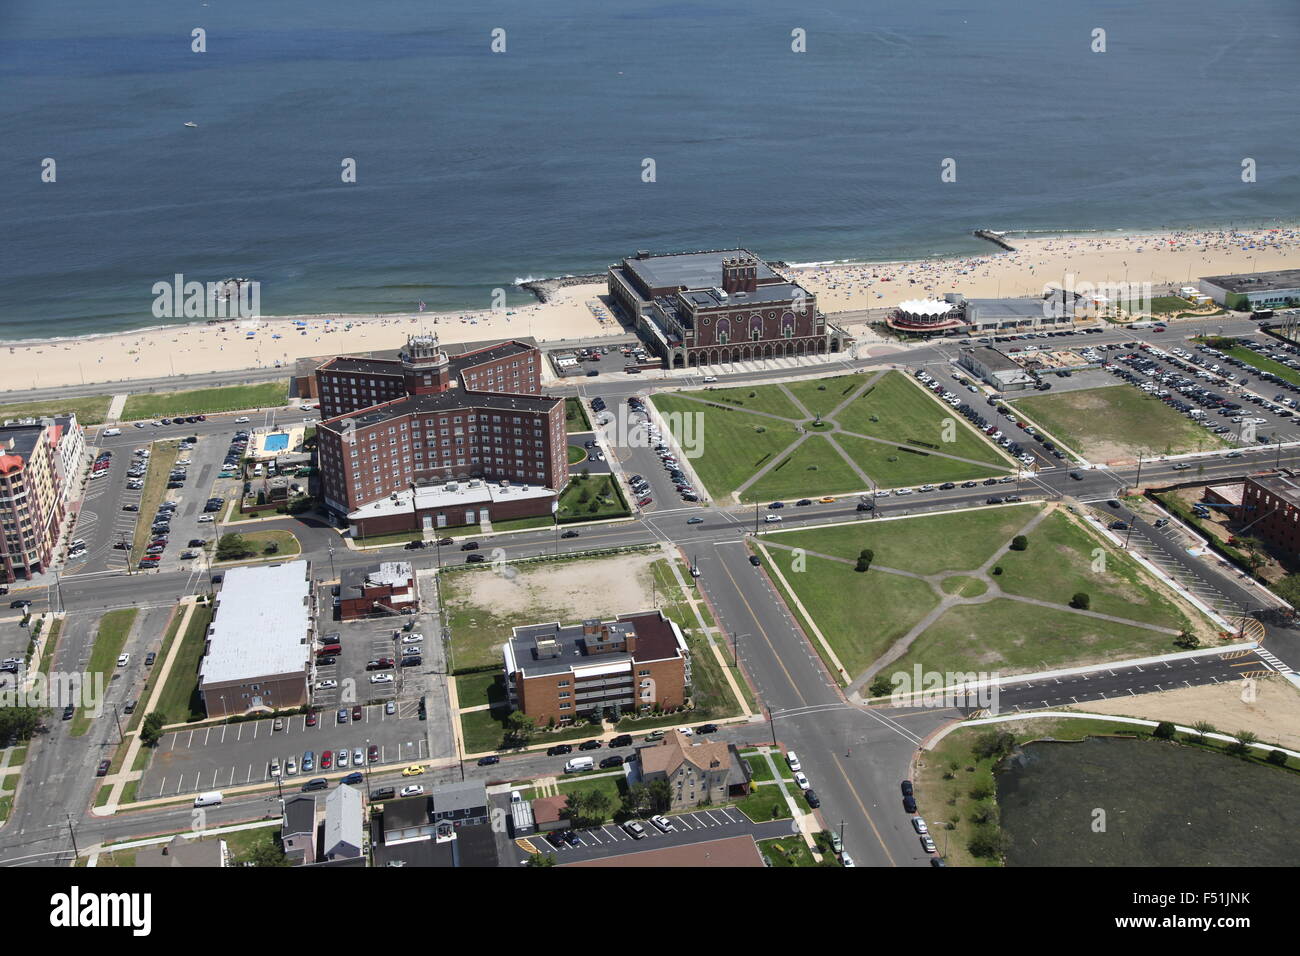 Aerial view of Convention Hall, Asbury Park, New Jersey Stock Photo